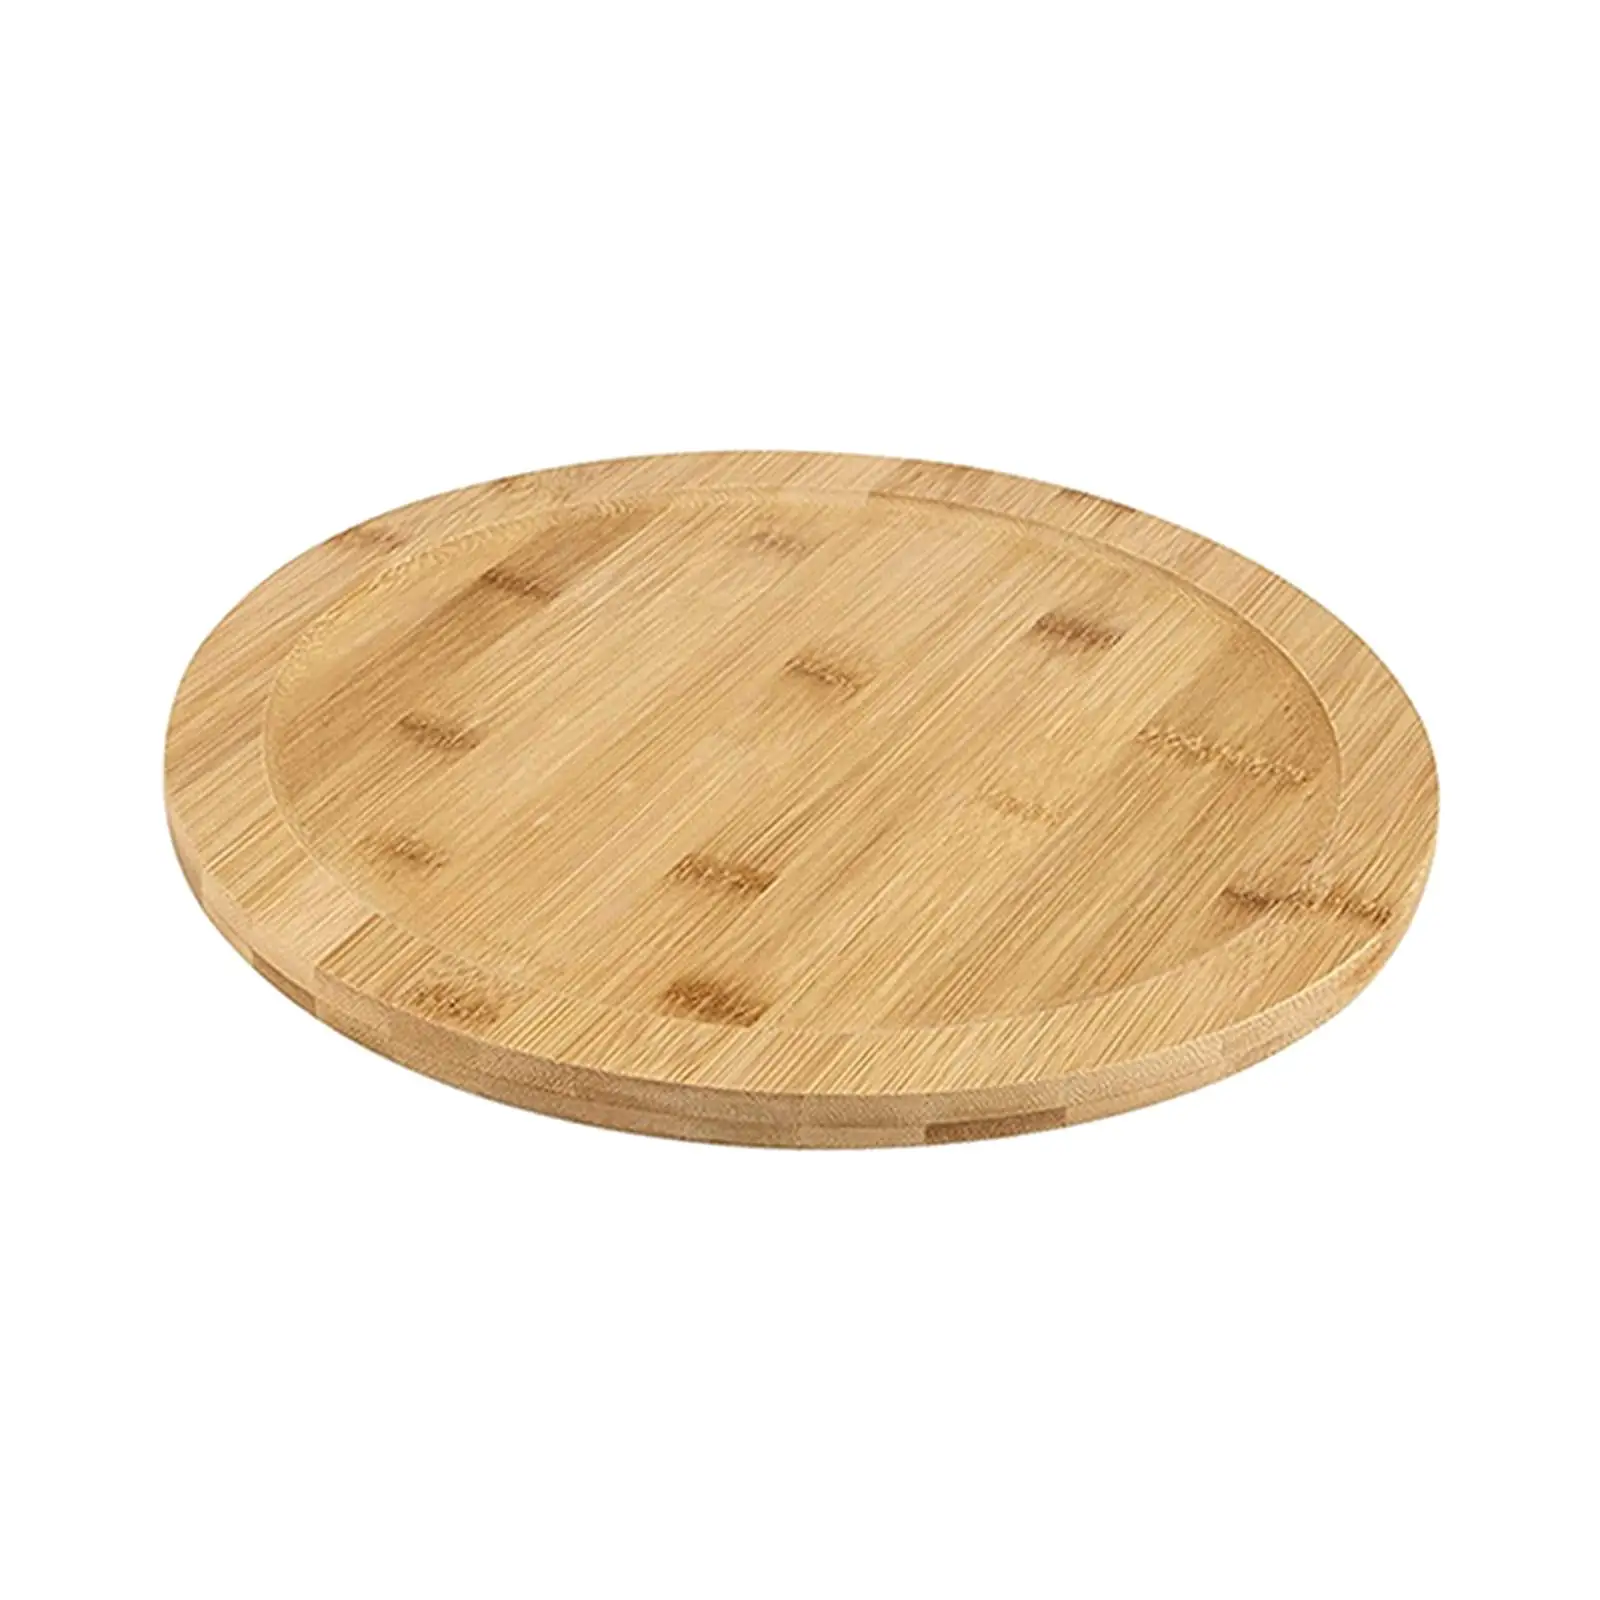 Wooden Round Rotating Plate Swivel Plate Rotating Board Wooden Rotating Dining Plate for Dining Table Kitchen Cabinet